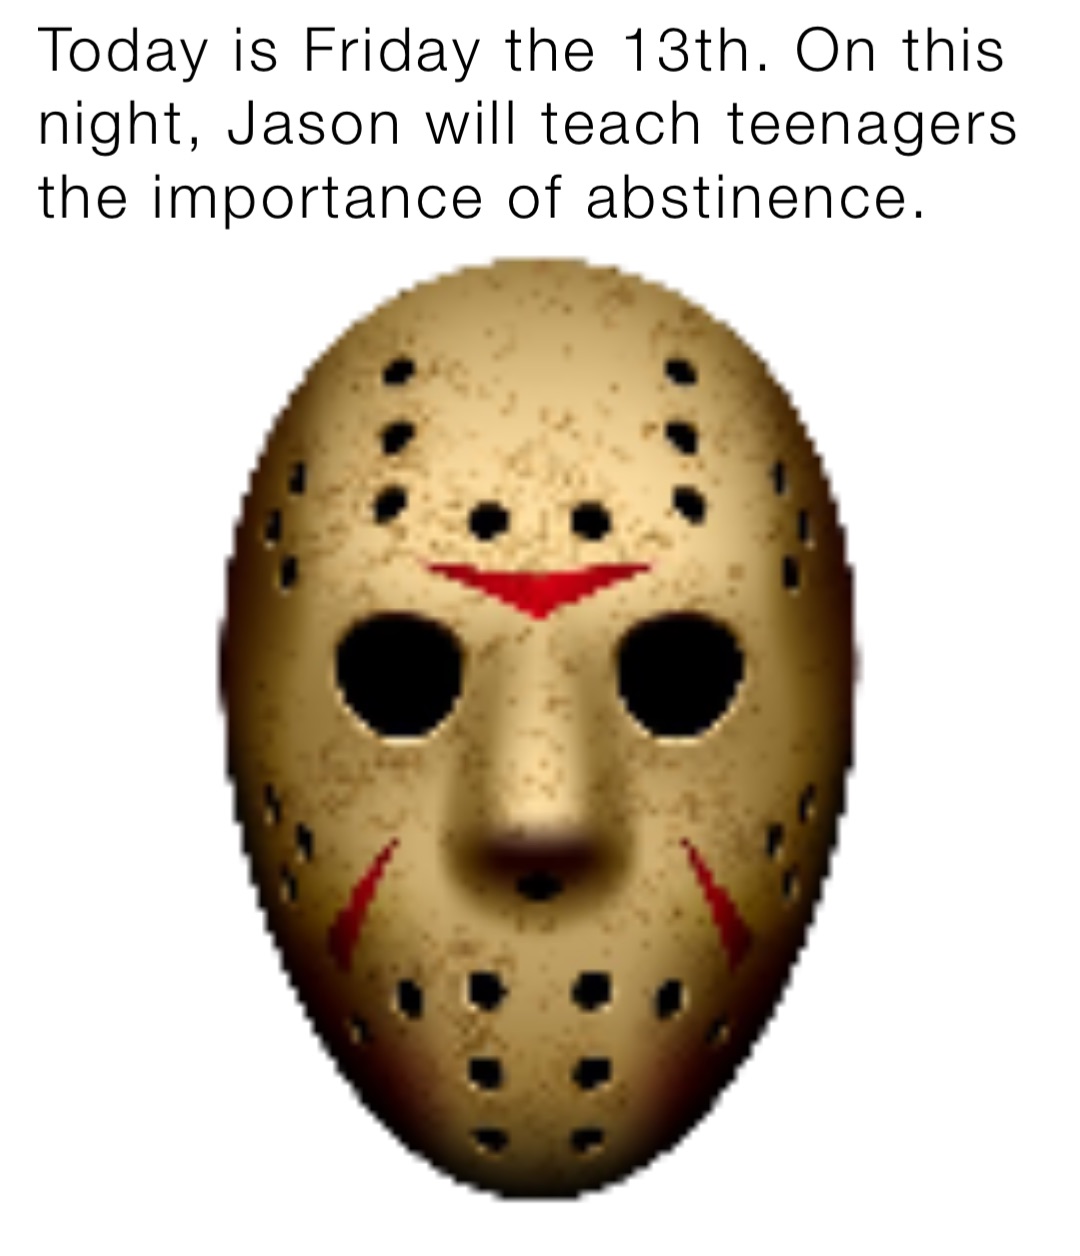 Today is Friday the 13th. On this night, Jason will teach teenagers the importance of abstinence.